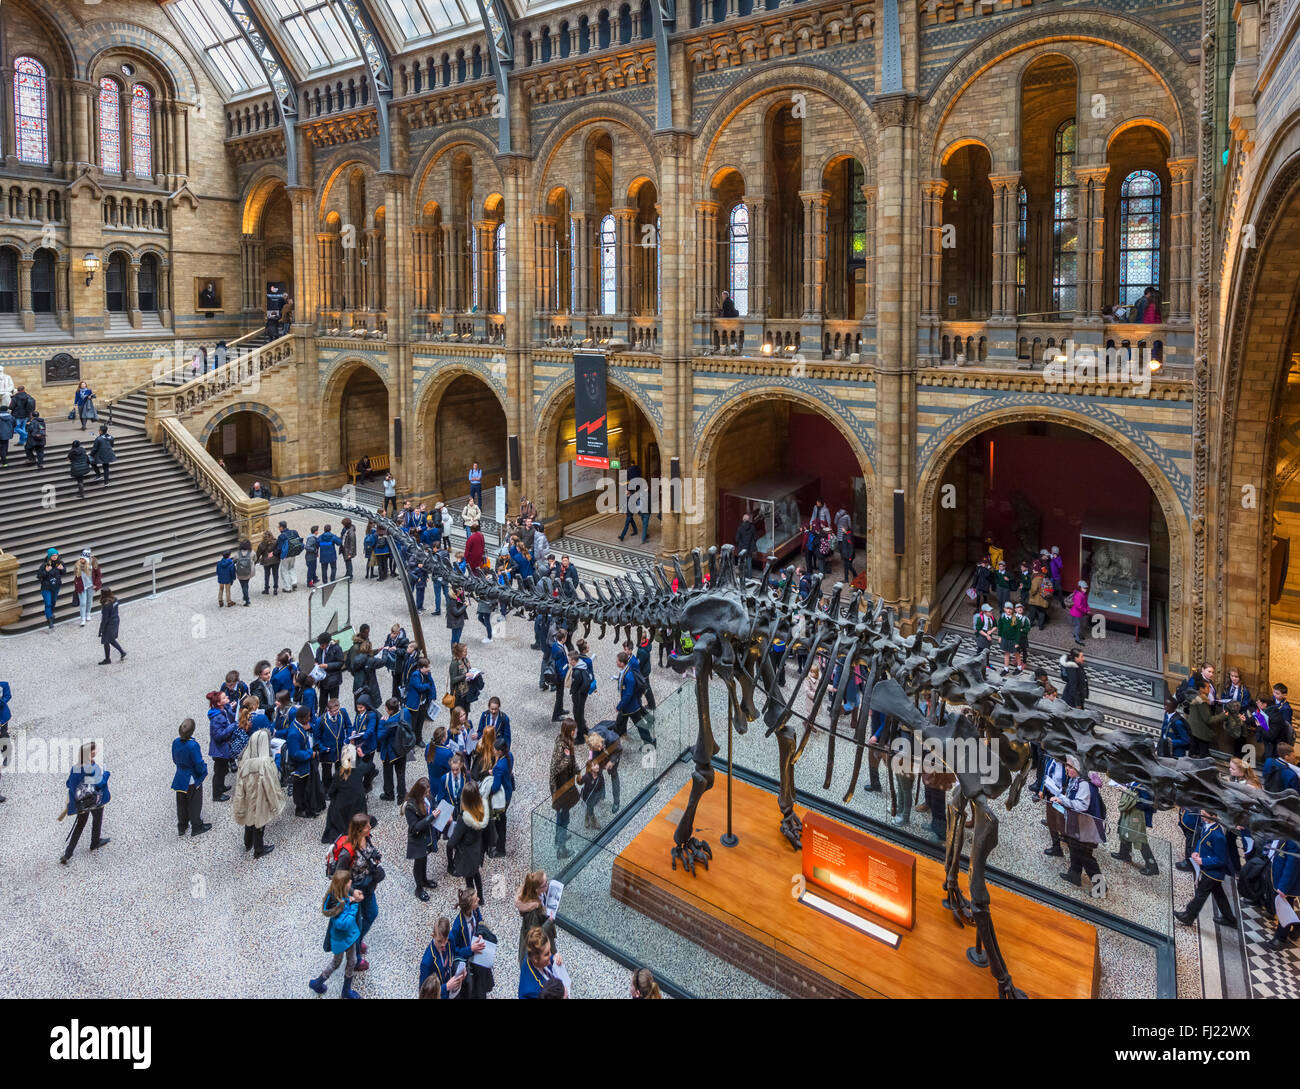 Hintze Hall with 'Dippy' the Diplodocus, a fossil skeleton cast, Natural History Museum, South Kensington, London, England, UK Stock Photo